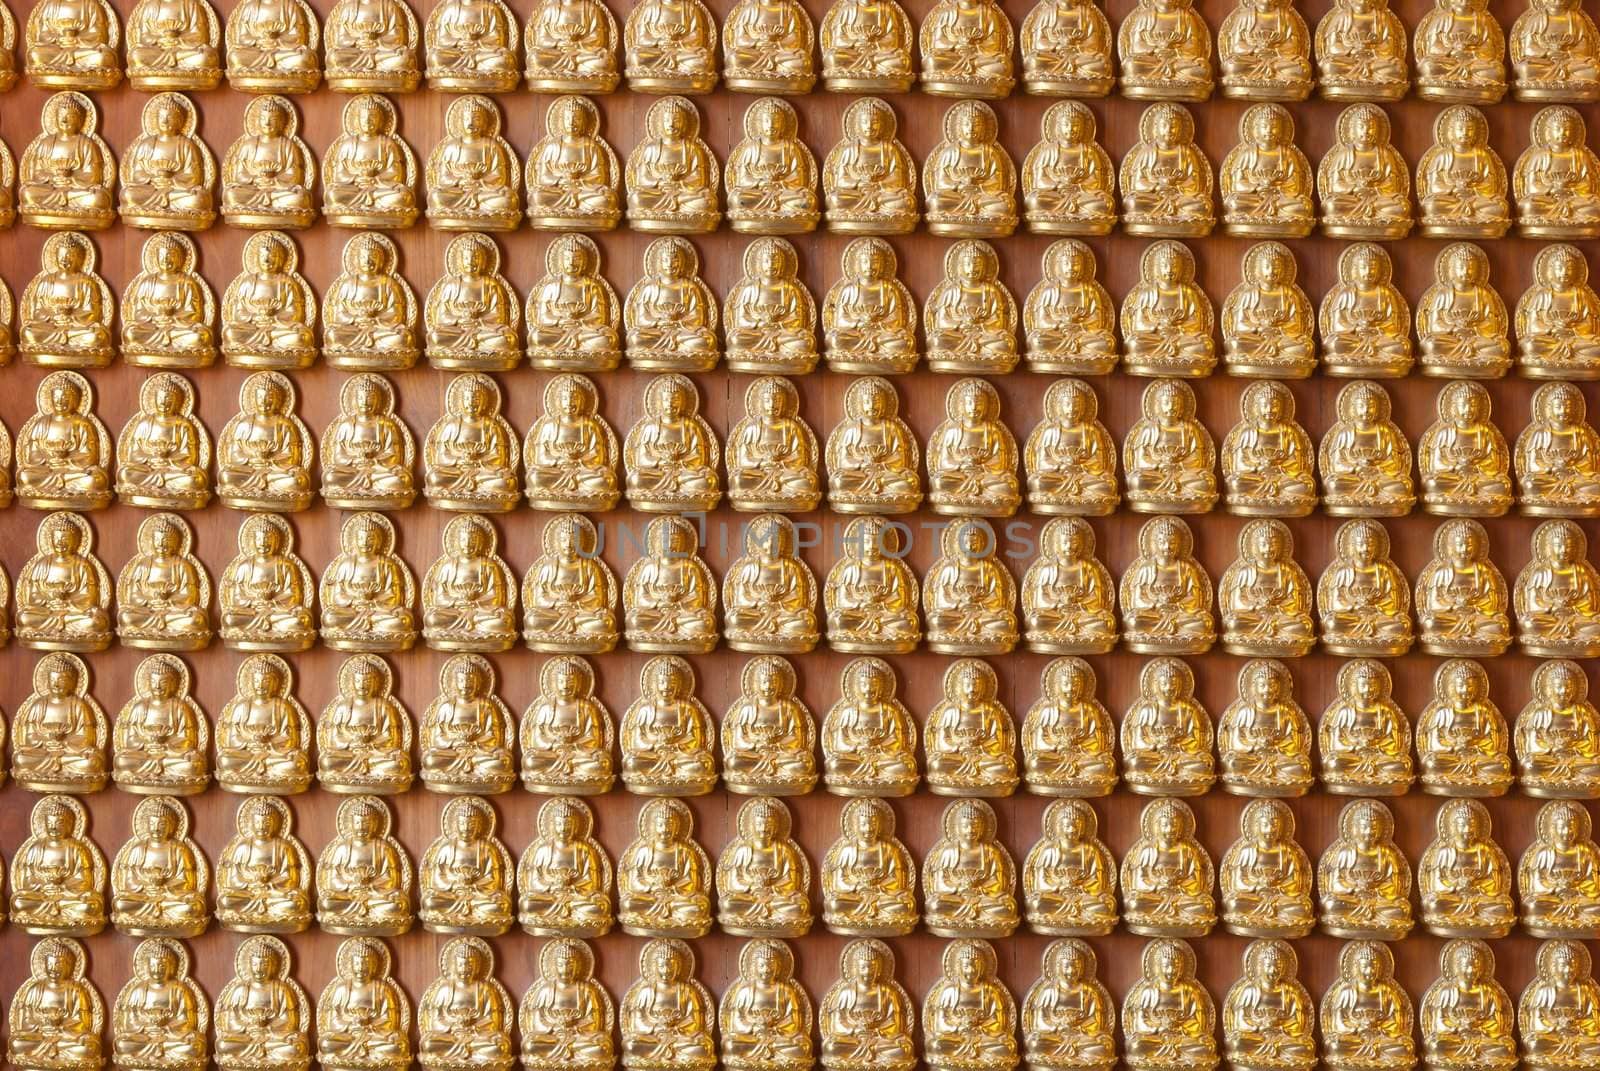 Hundreds of golden Buddha statues background at chinese temple